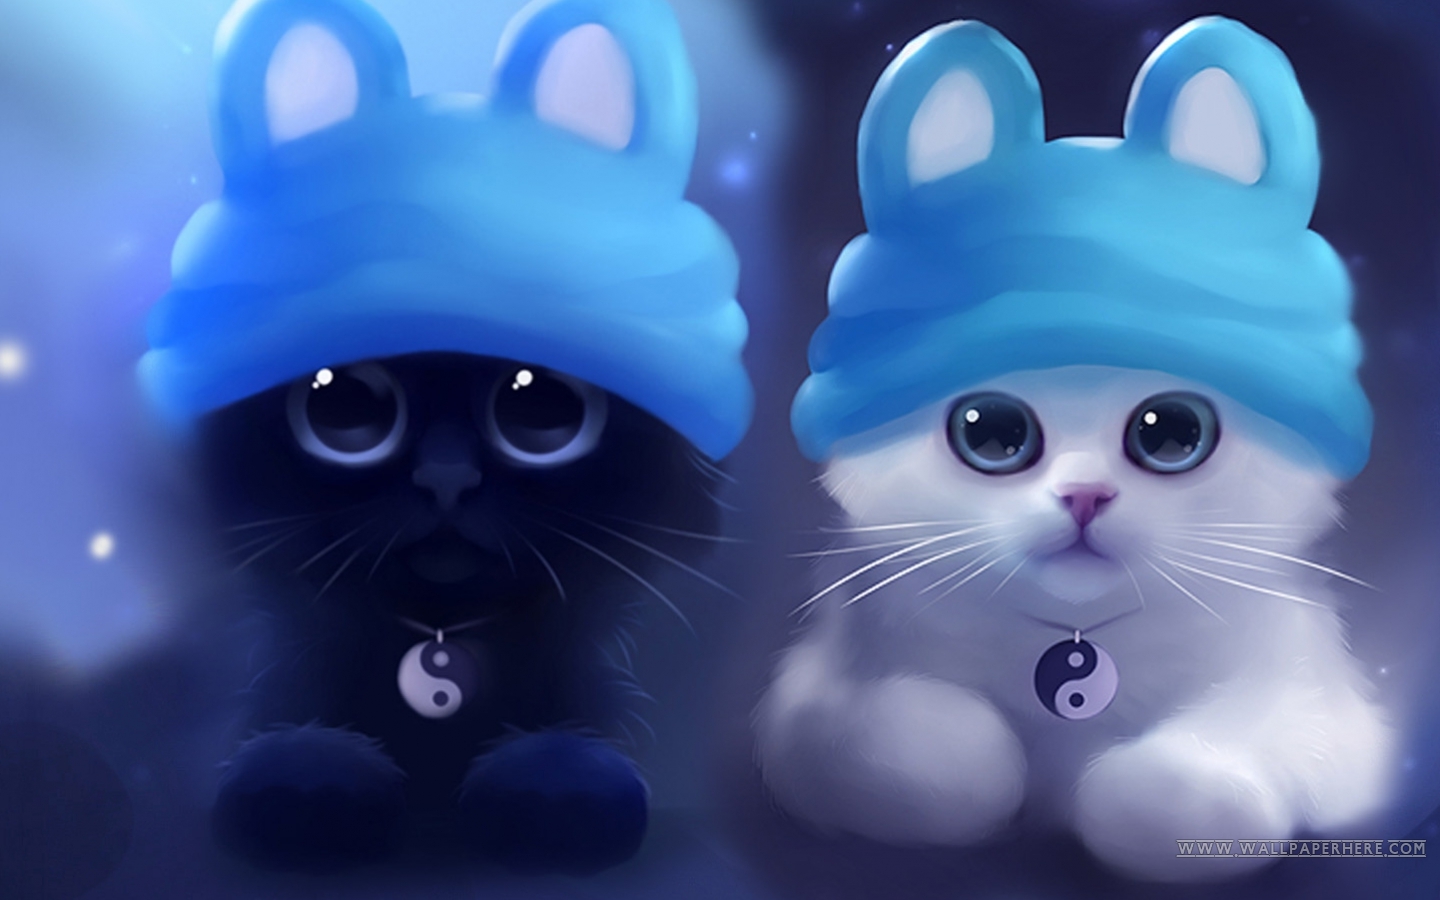 Cute Cat Backgrounds For Your Desktop - I Like Cats Very Much